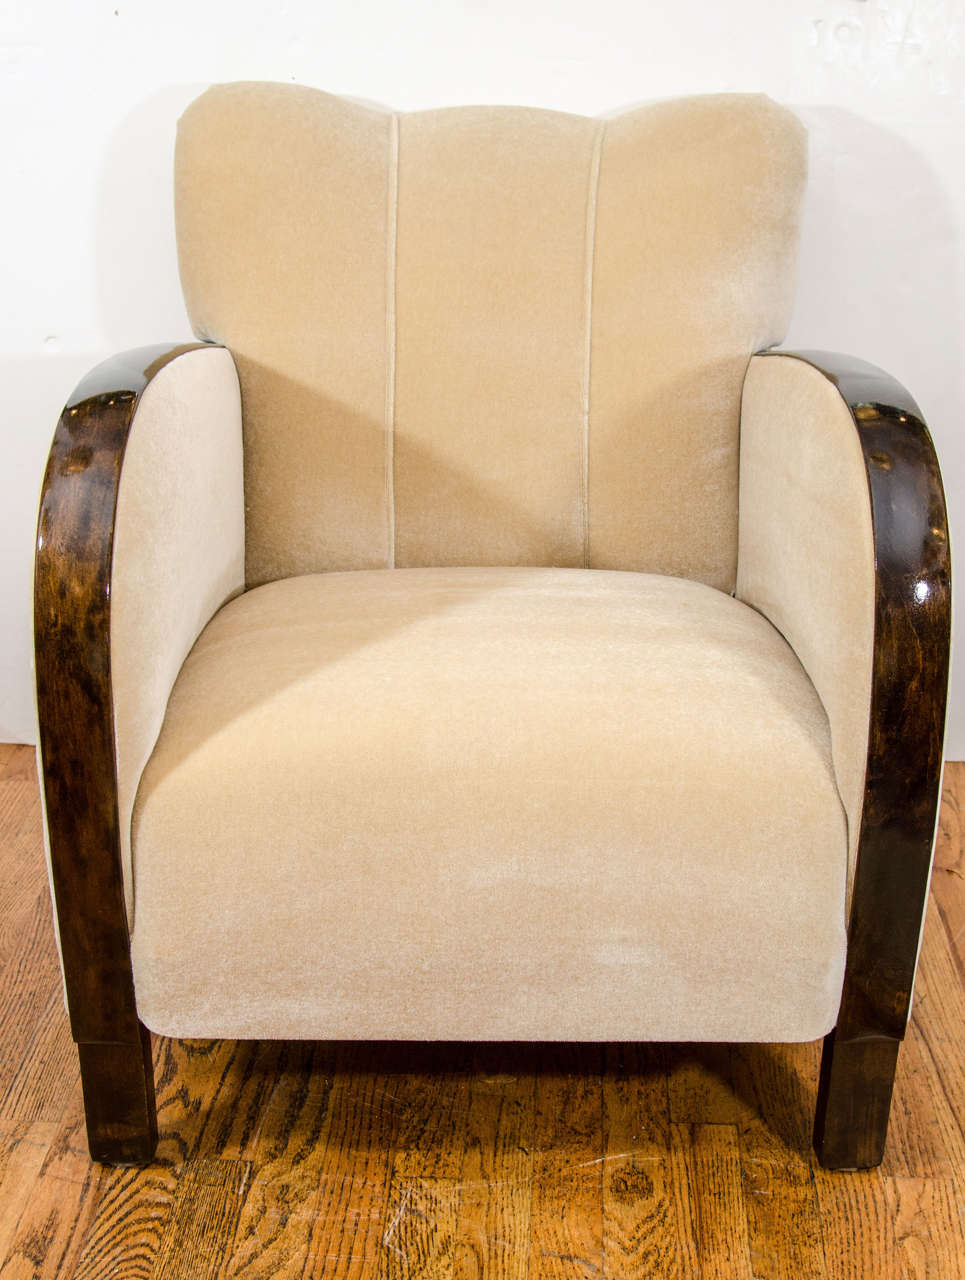 Who can resist the pull of a comfy, mohair reading chair?  Sprung, and newly upholstered with a cool lining of horsehair, the tailored, channelled back invites you home to sit back and relax!  A cocktail, anyone?